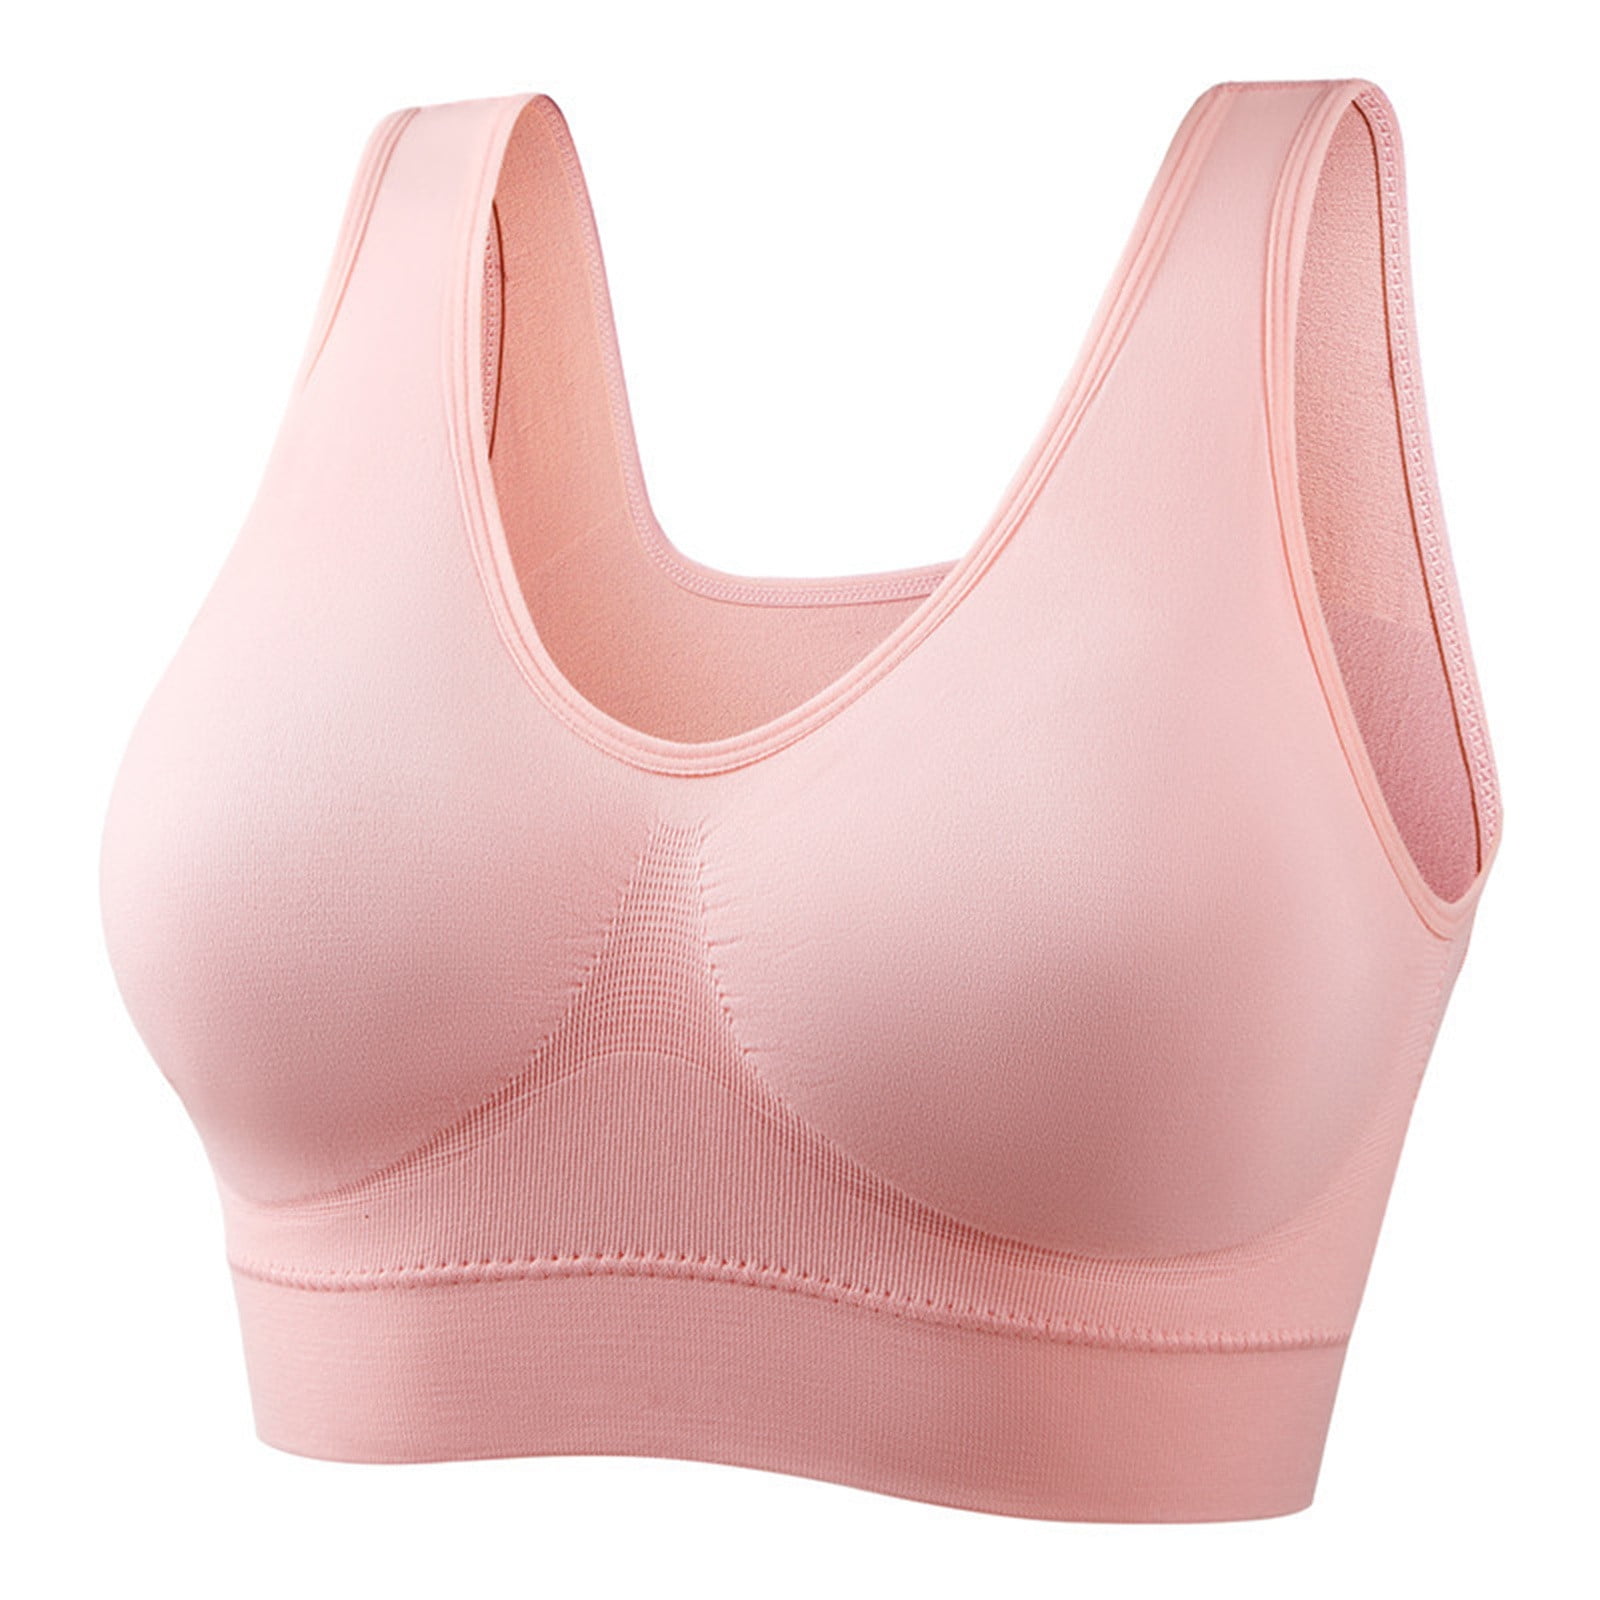 KDDYLITQ Push Up Bra for Women 42dd Seamless Women's Sports Bras Plus Size  Push Up Minimizer Bras for Women Wirefree Support Yoga T Shirt Bras for  Women No Underwire Complexion XL 